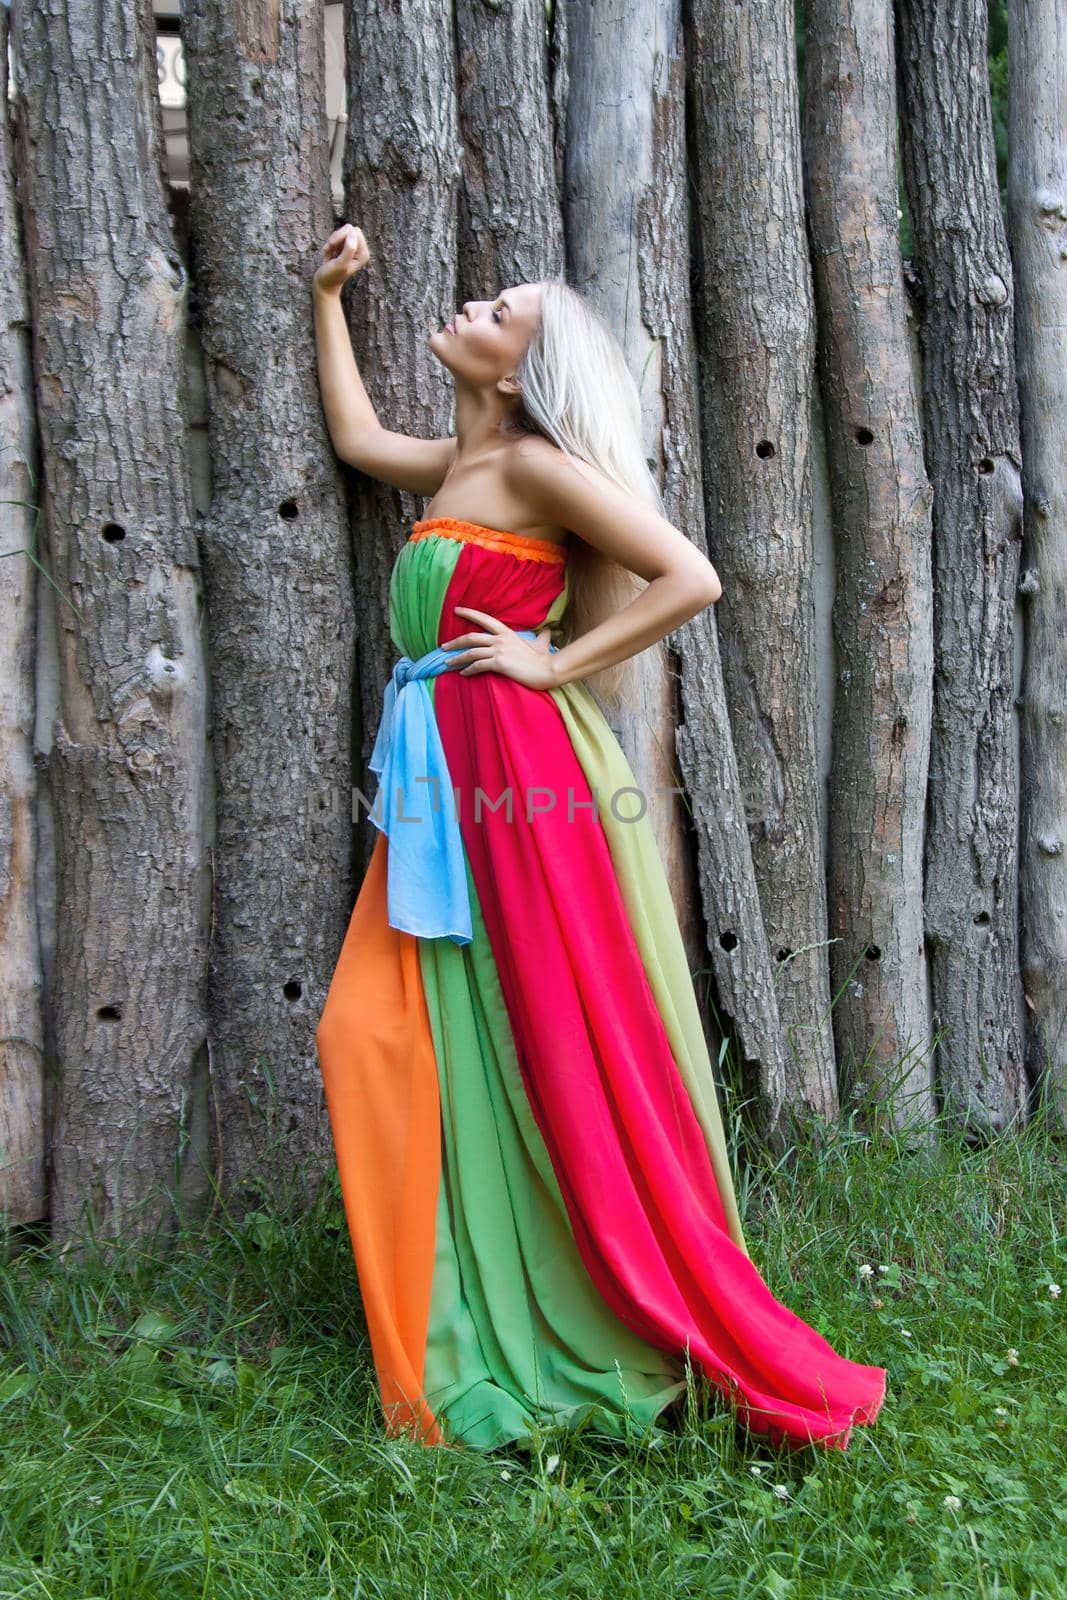 Sexy woman outdoor with nice colorful dress by Julenochek